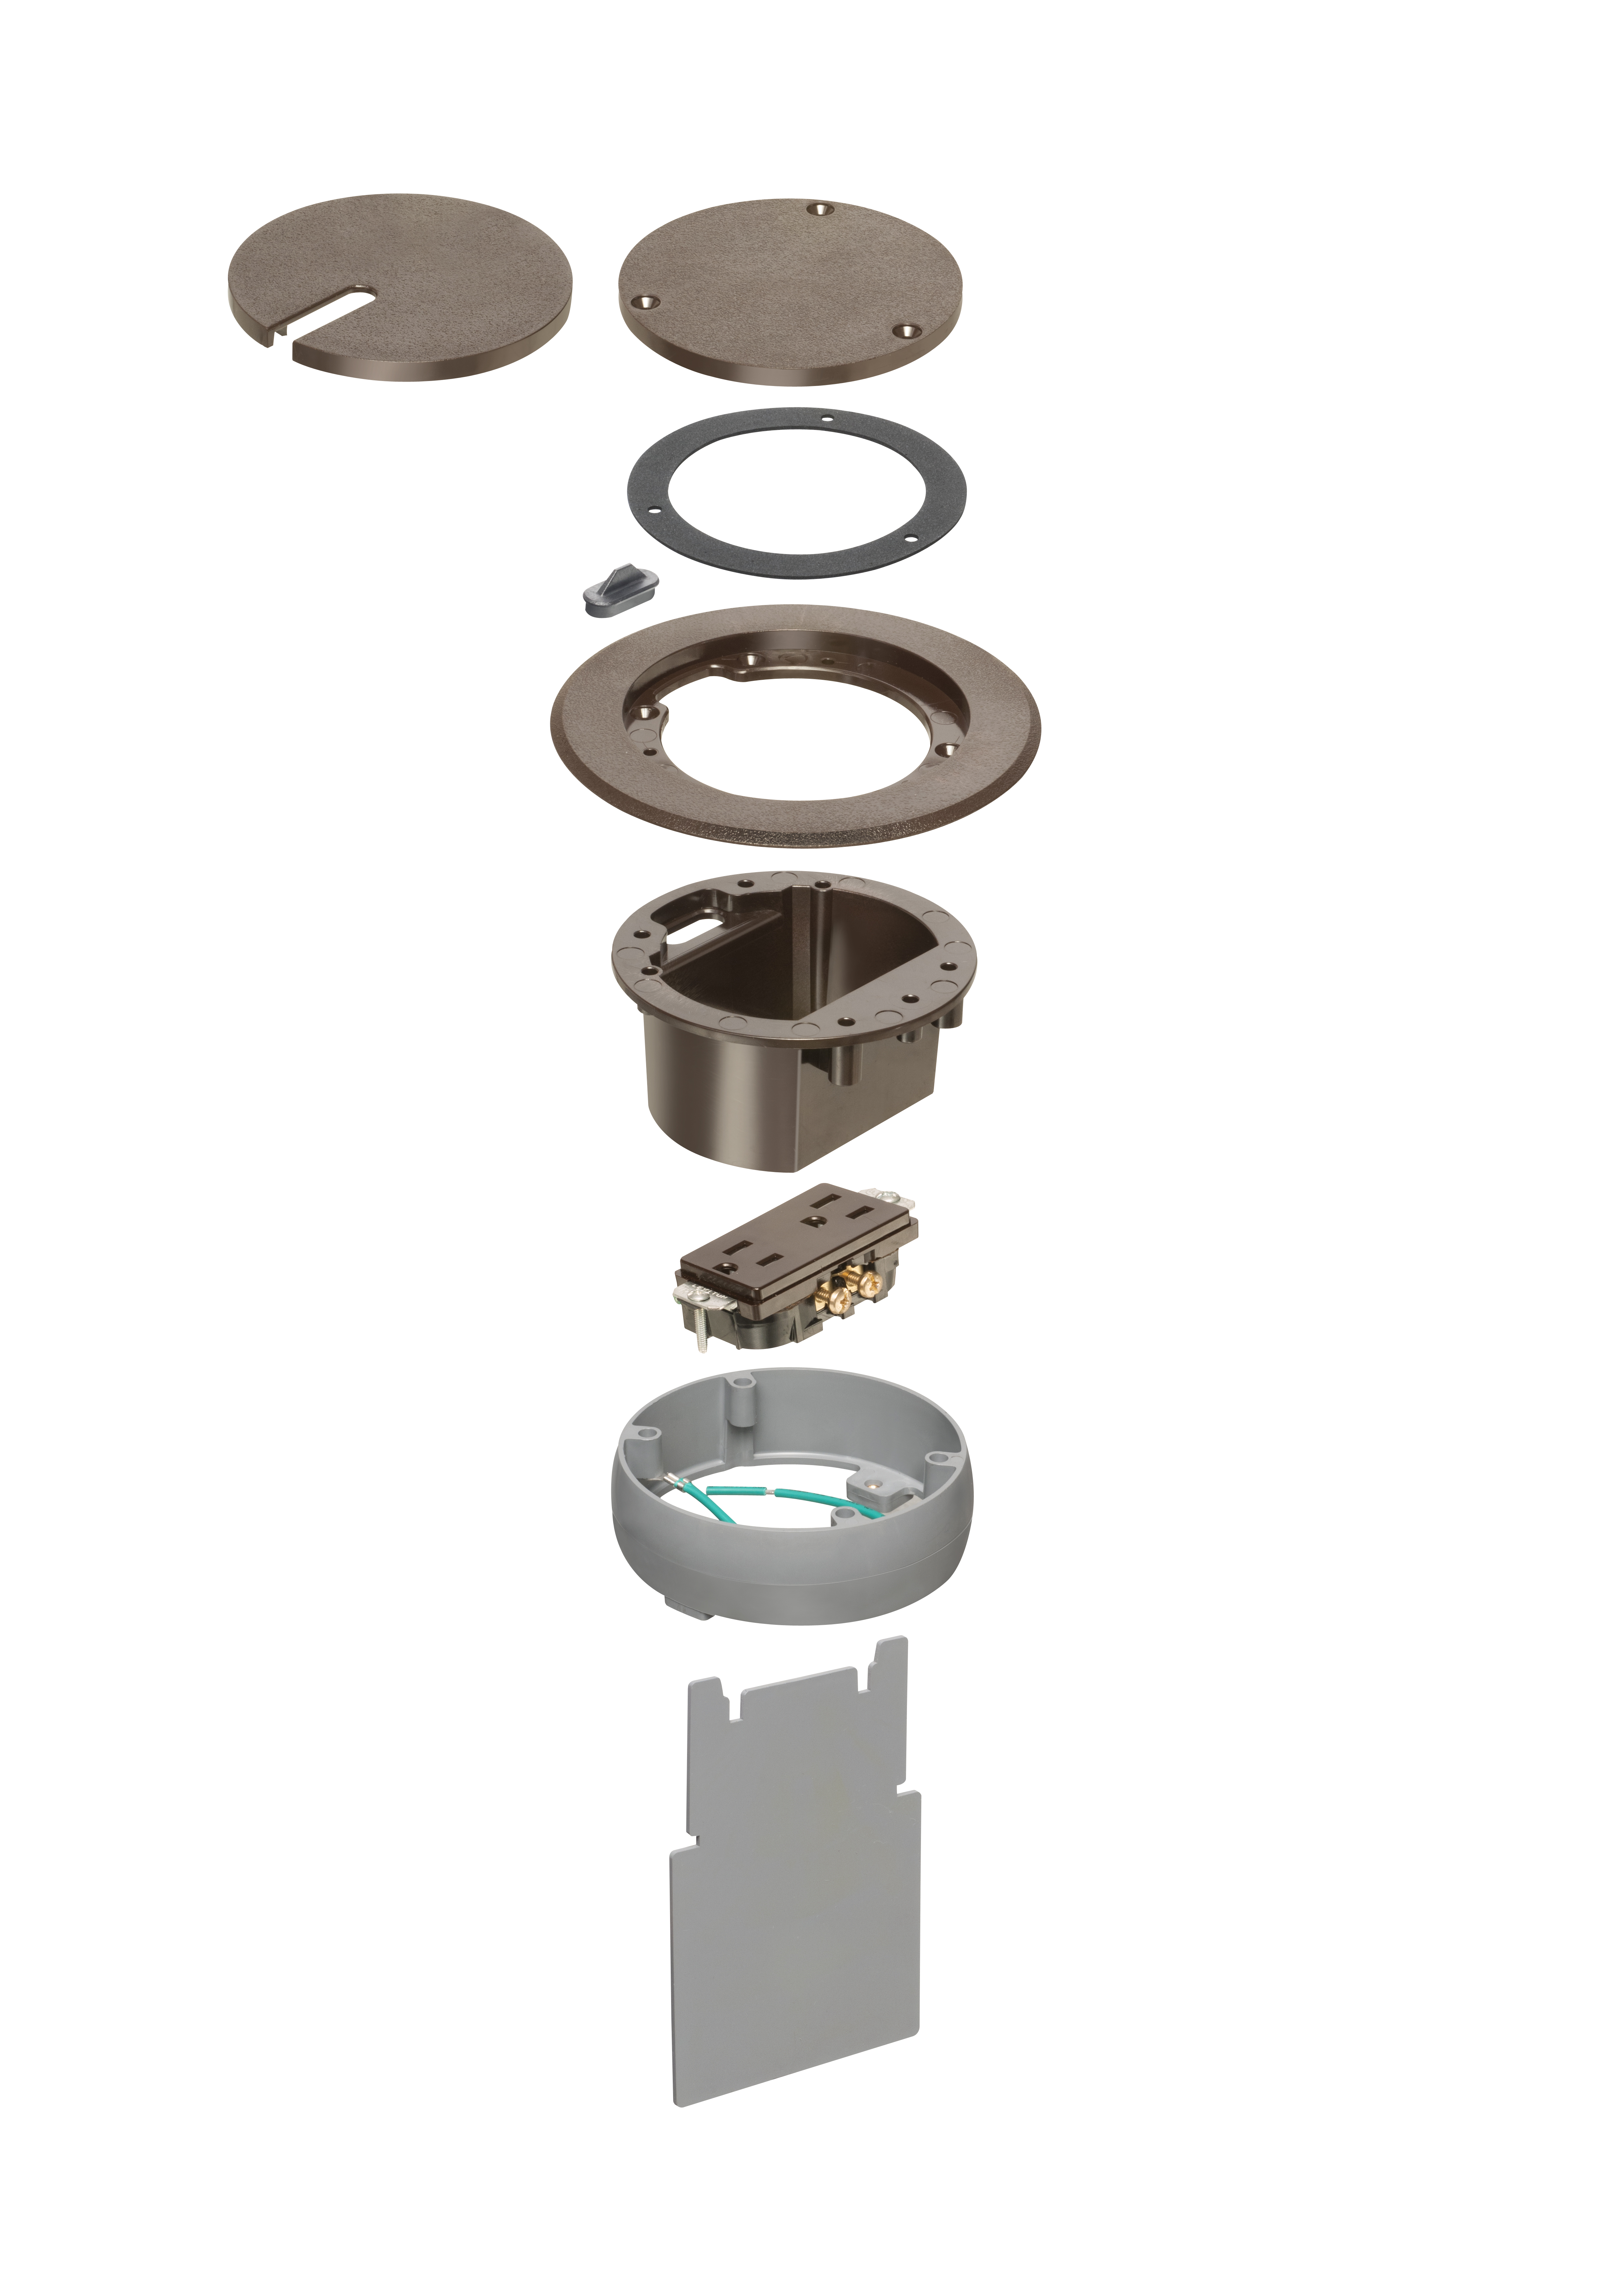 IN BOX cover kit. recessed receptacle and low voltage keystone for new concrete. Installs in Arlington's FLBC4500 and FLBC4502 box. Non metallic. Color Brown.